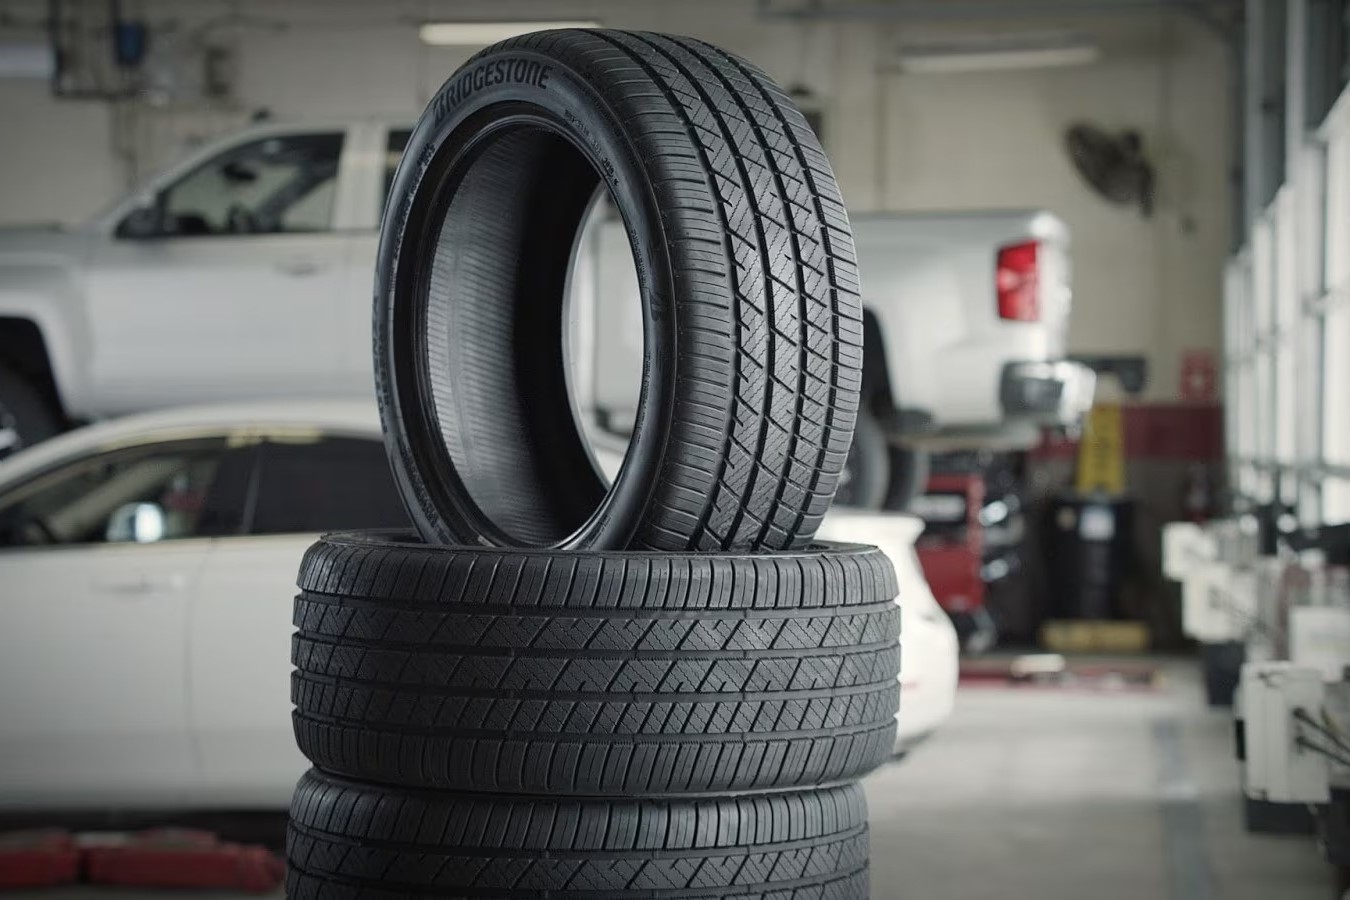 Unbelievable Price For Firestone Tire Rotation Revealed!